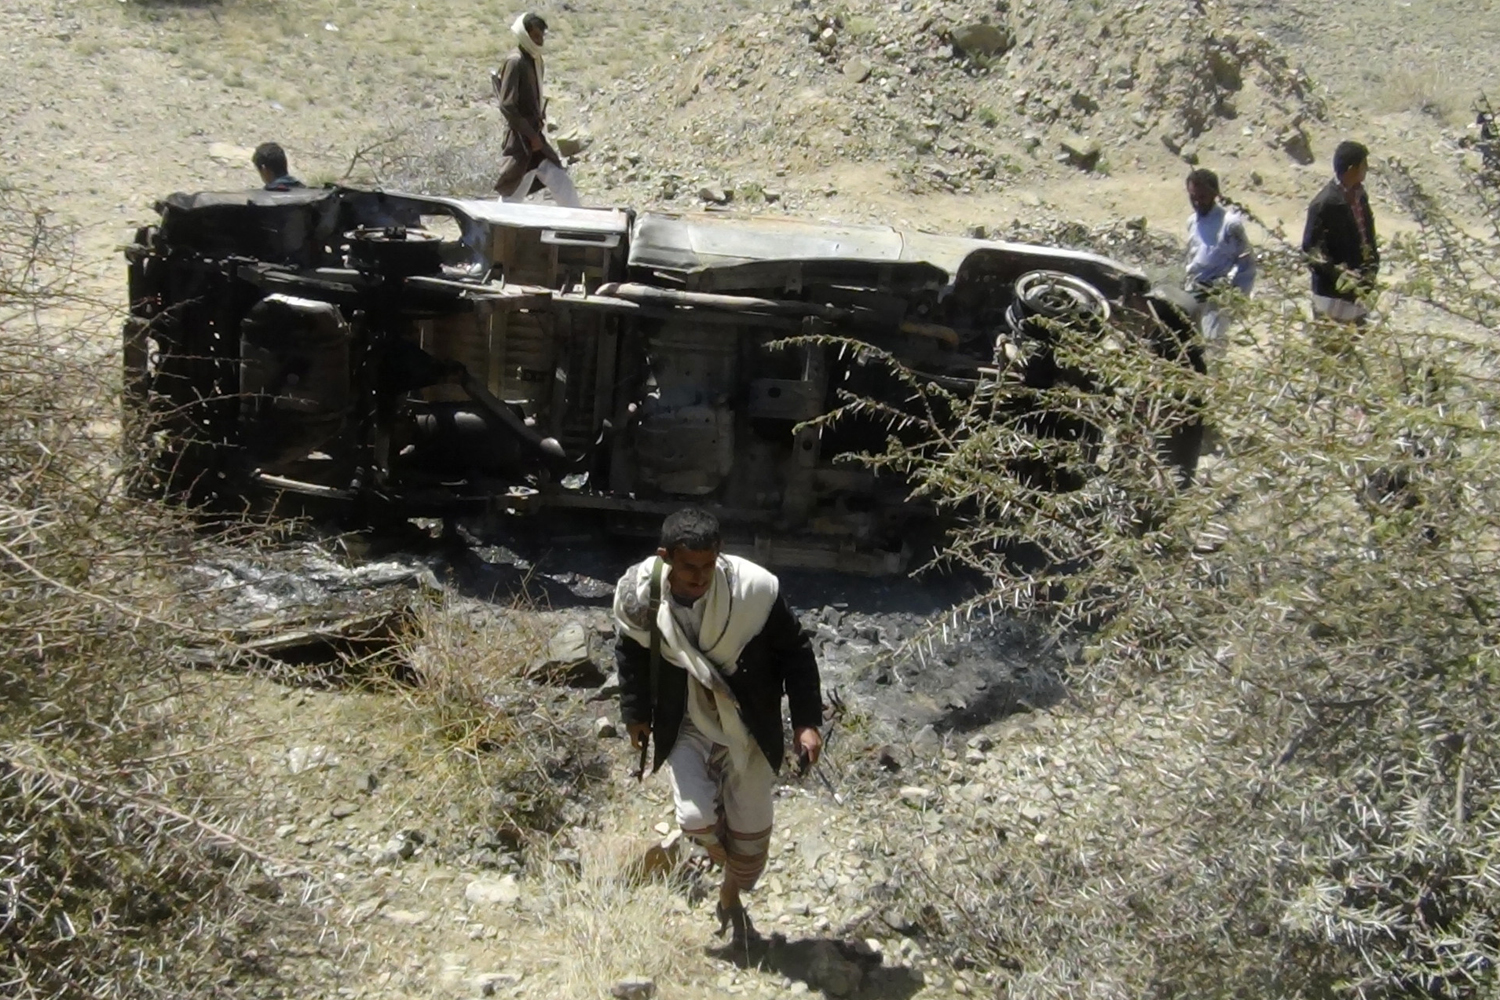 People inspect the wreckage of a car hit by an air strike in the central Yemeni province of al-Bayda